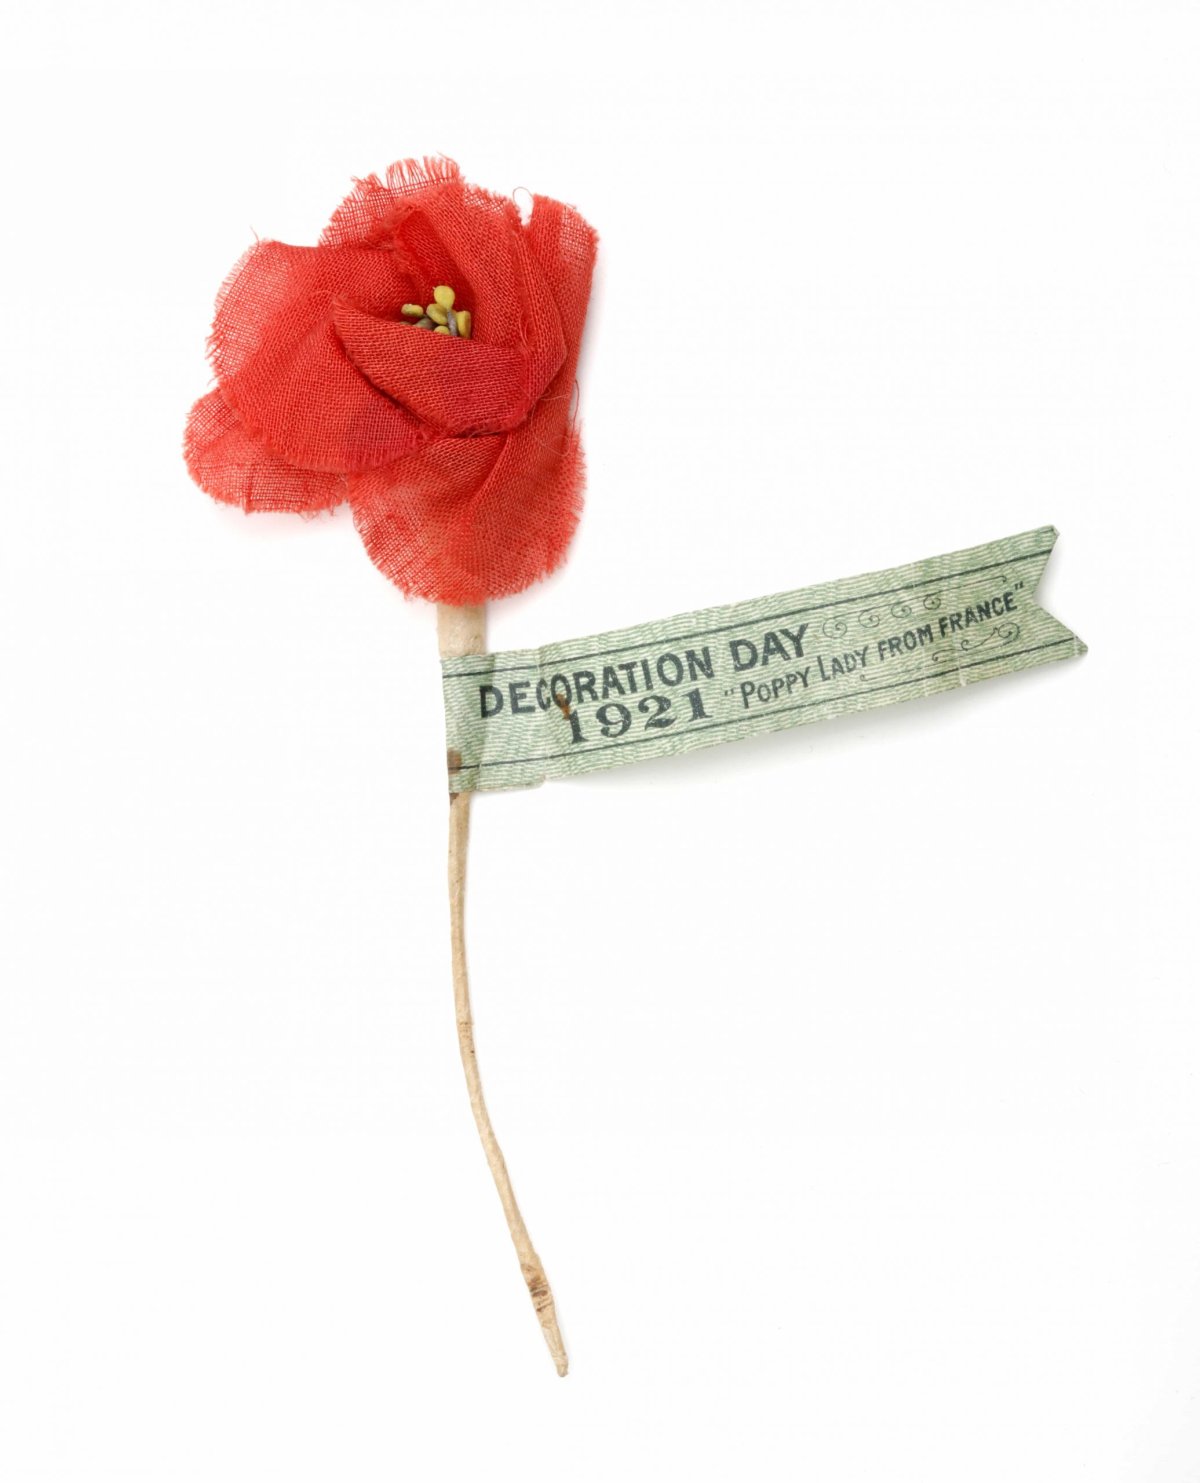 70 Poppies - Clothing ideas  fashion, poppies, remembrance